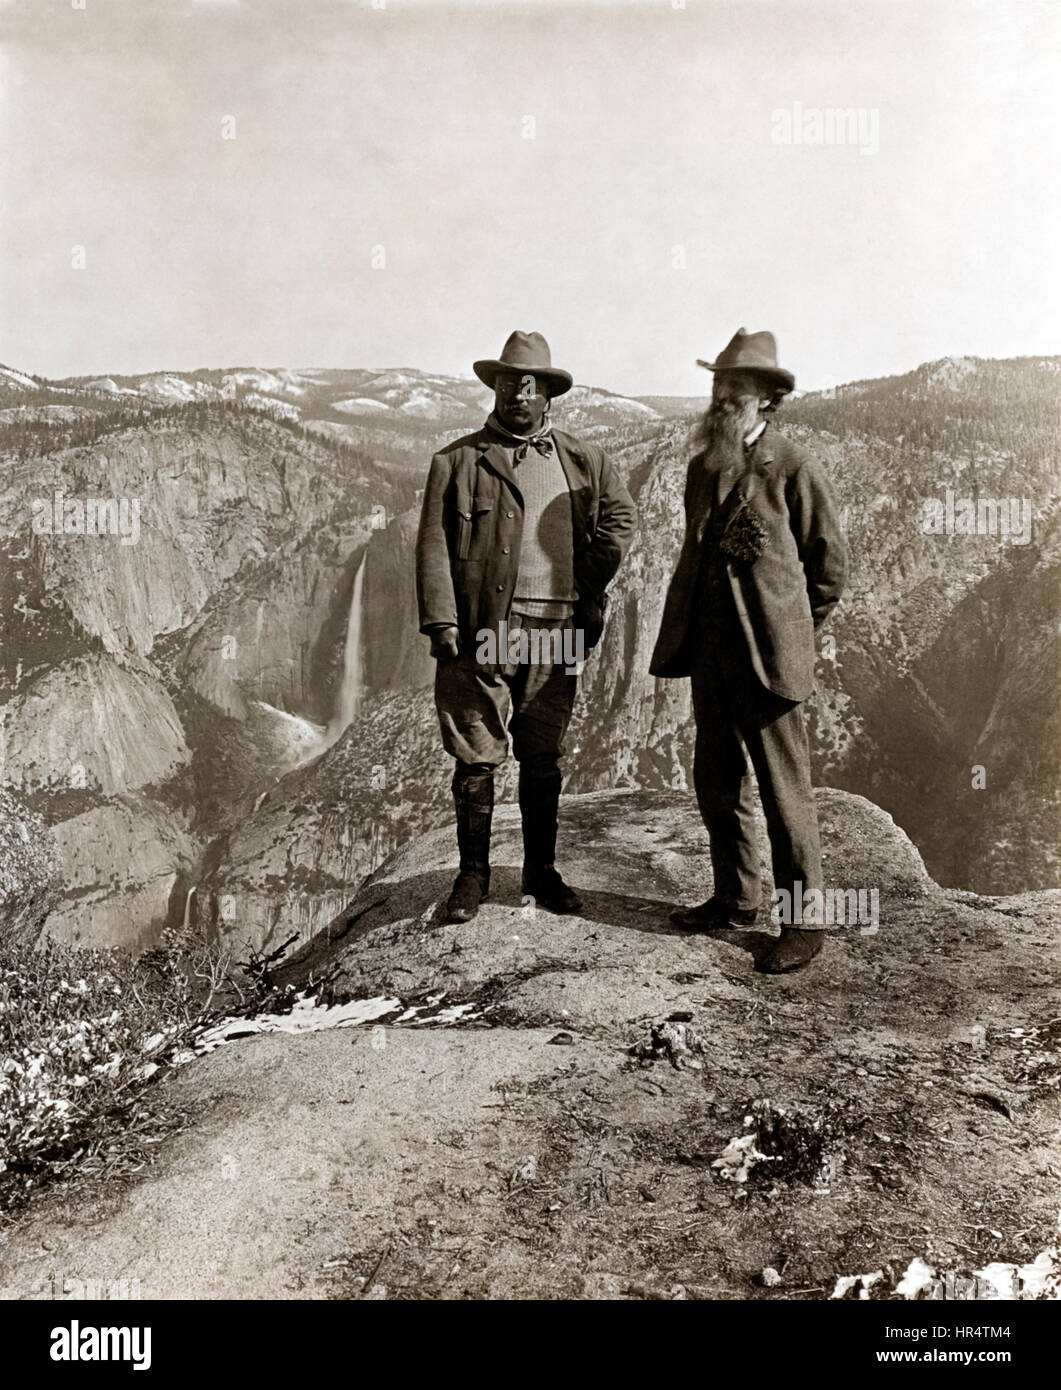 President Theodore Roosevelt (1858-1919) and naturalist John Muir (1838-1914) standing on Glacier Point in Yosemite Valley, California in 1903 during a camping trip. Muir’s passion for the preservation of wilderness areas in the United States conveyed through his writing helped bring about the creation of the US National Park Service in 1916. Stock Photo